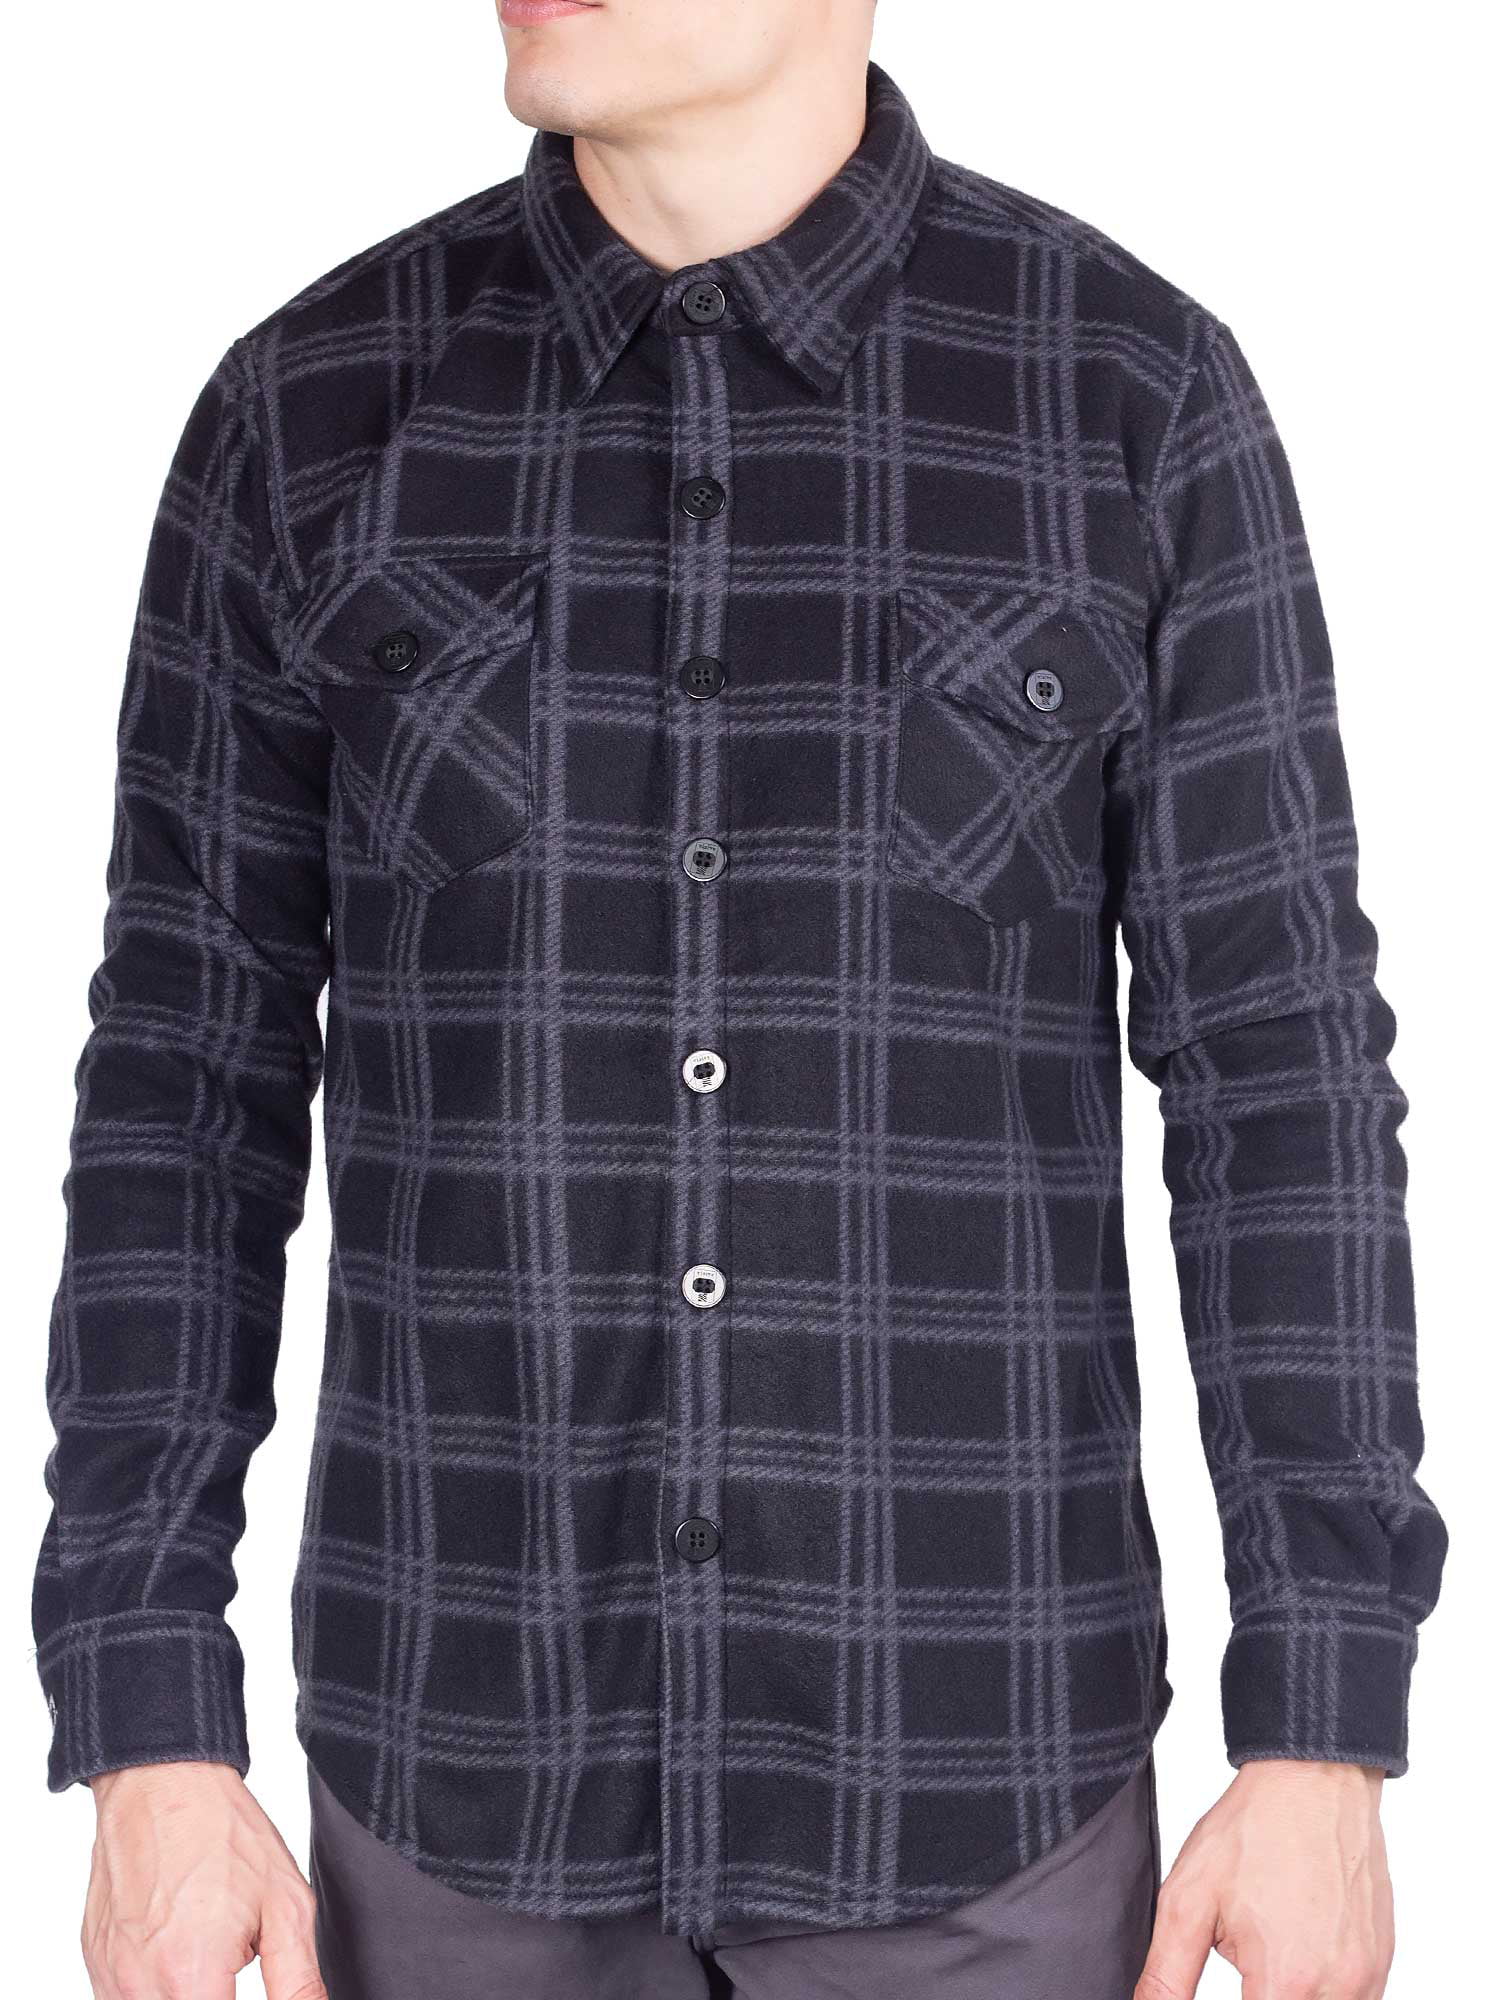 Visive Mens Flannel Shirt Long Sleeve Button Down Up Heavy Flannel Shirts Up to Size 5XL